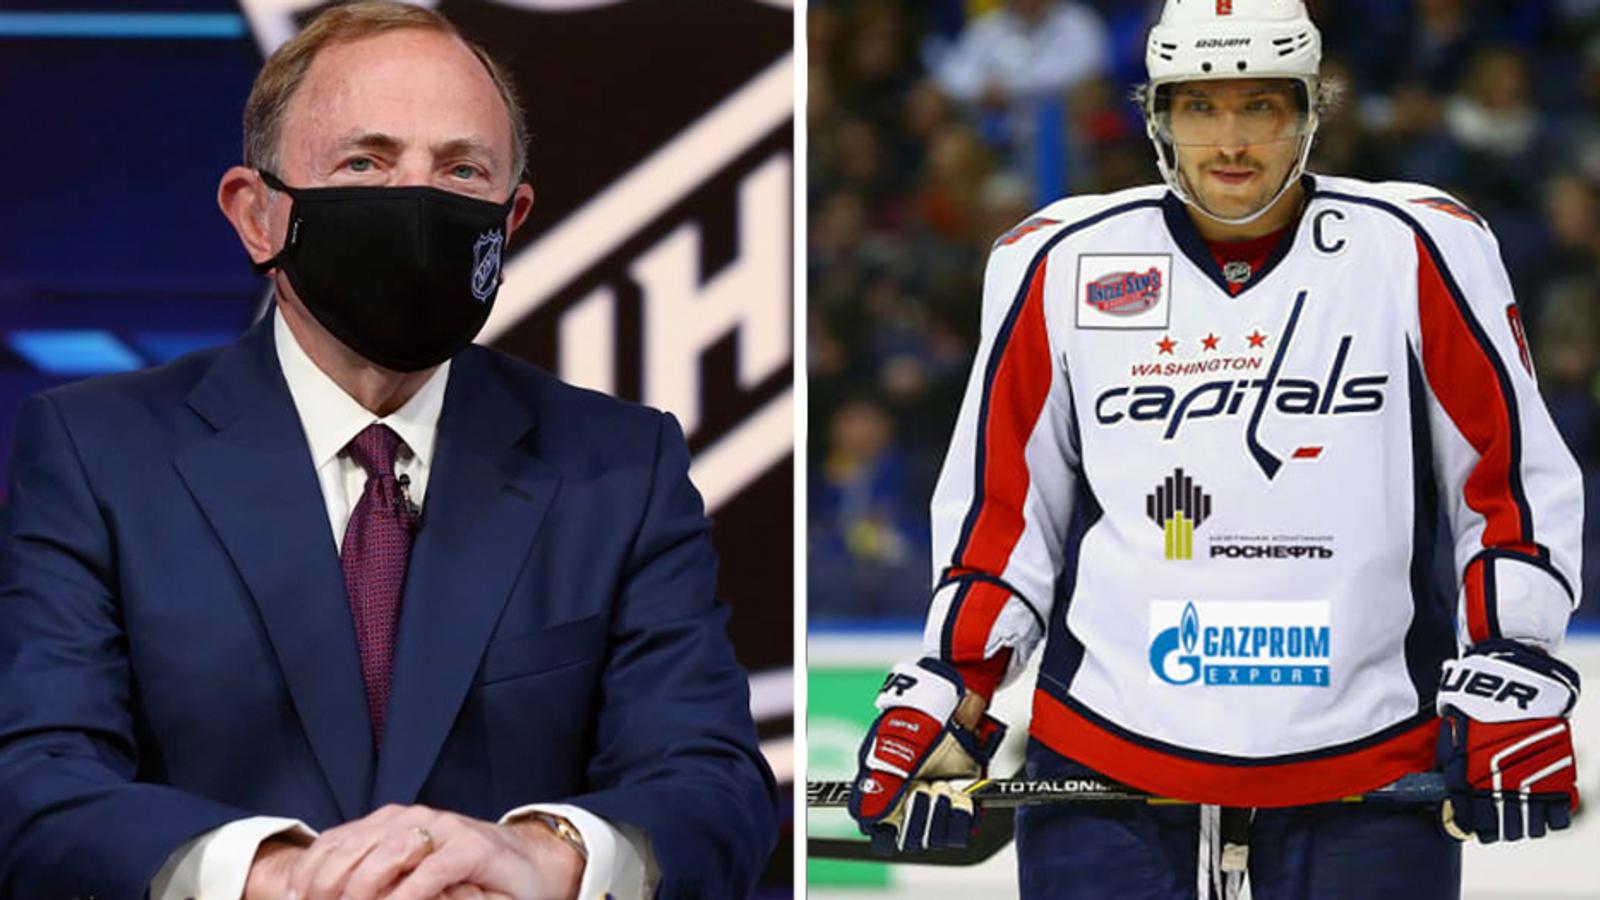 Bettman finally addresses the elephant in the room: Jersey advertisements